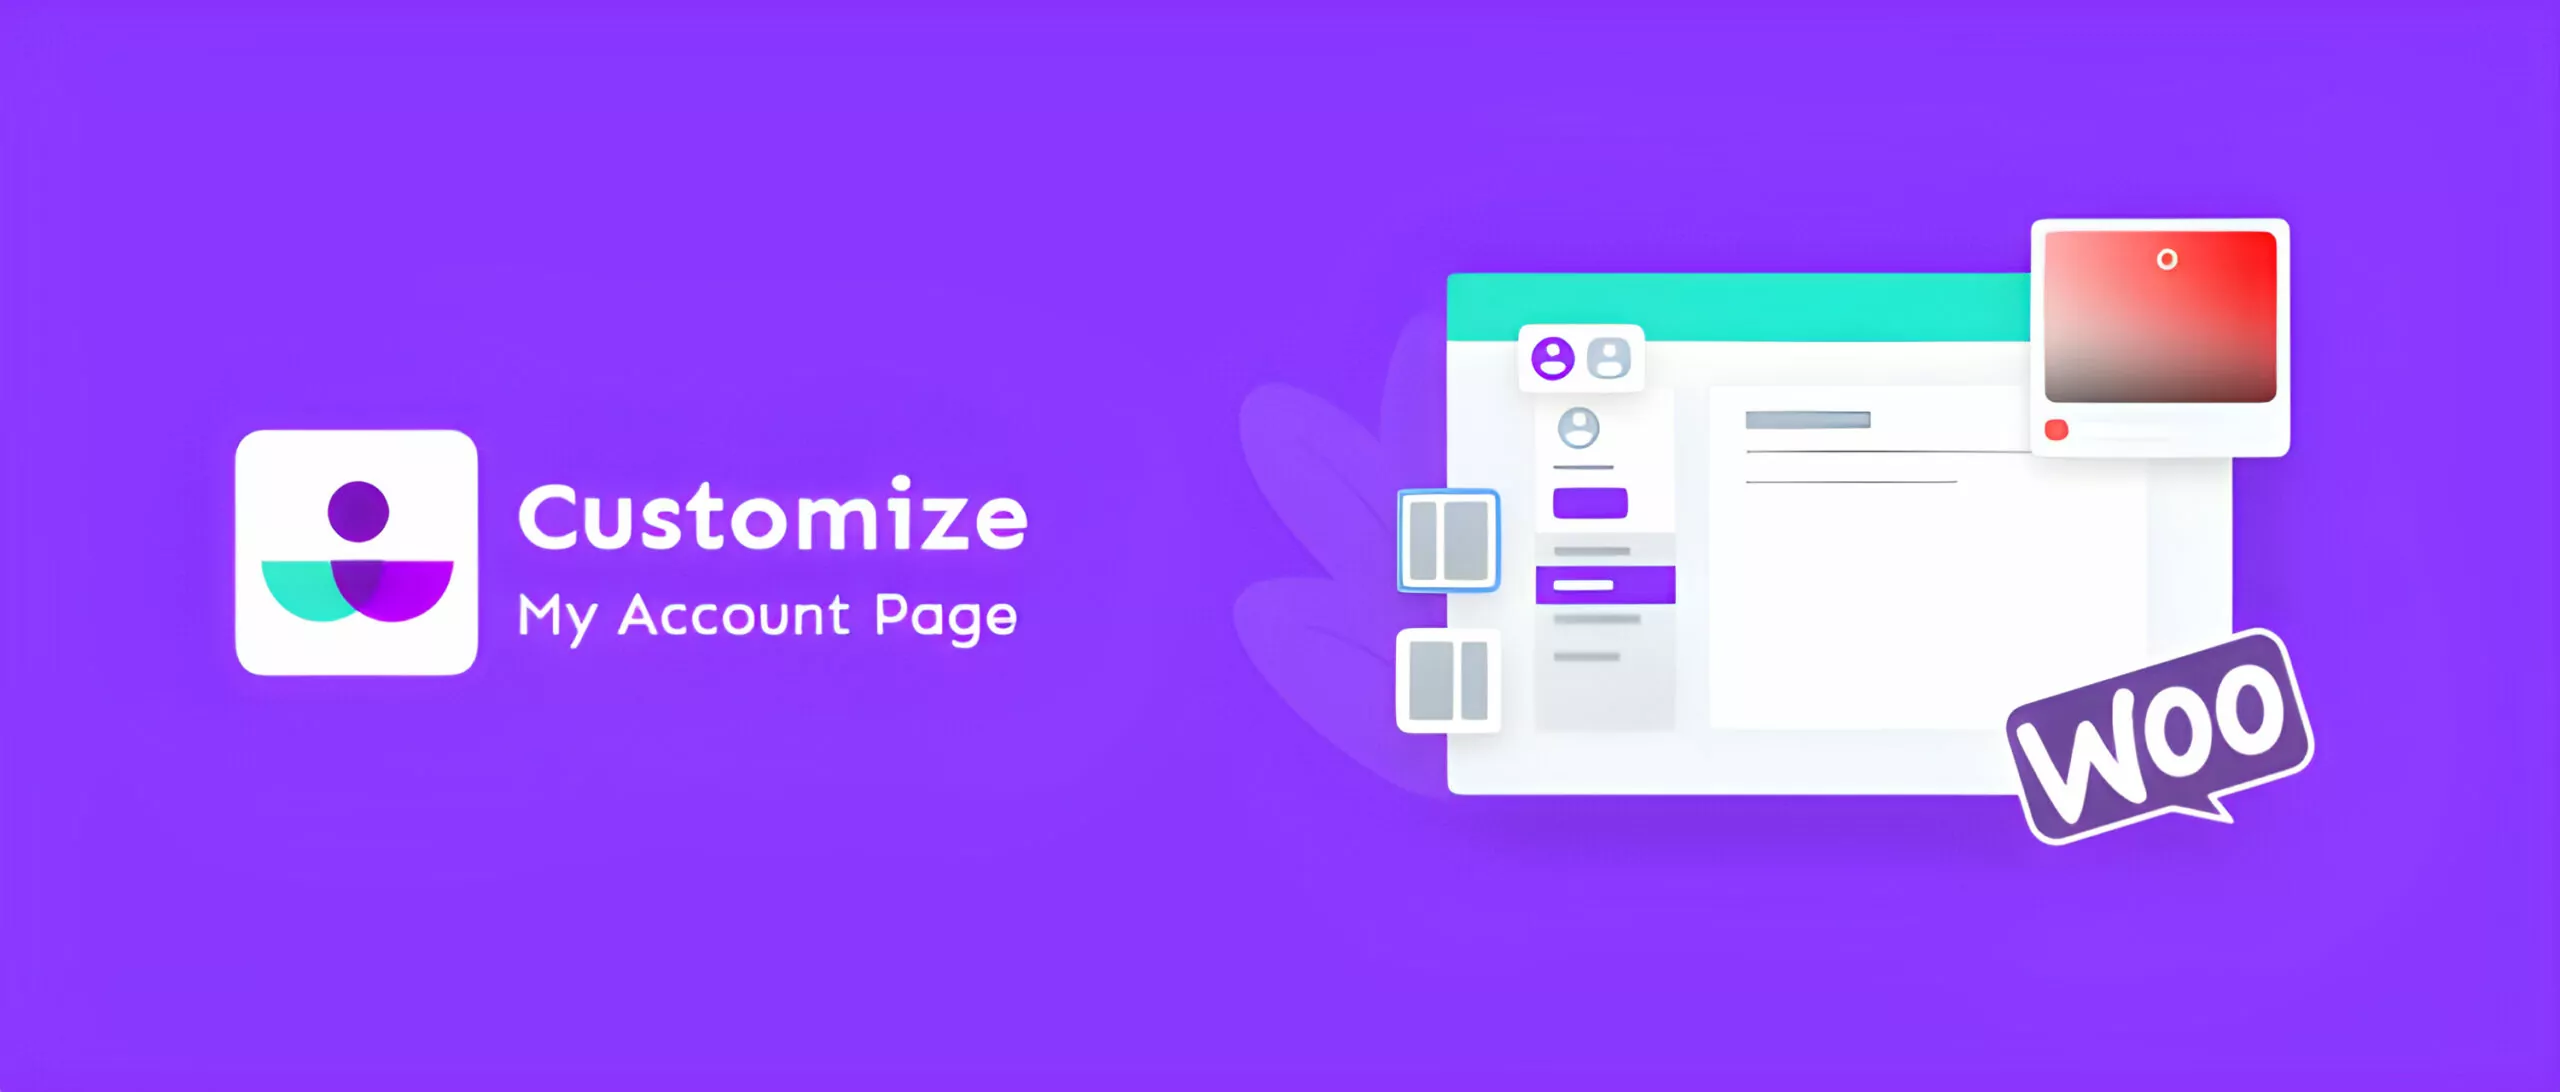 Customize My Account Page for WooCommerce